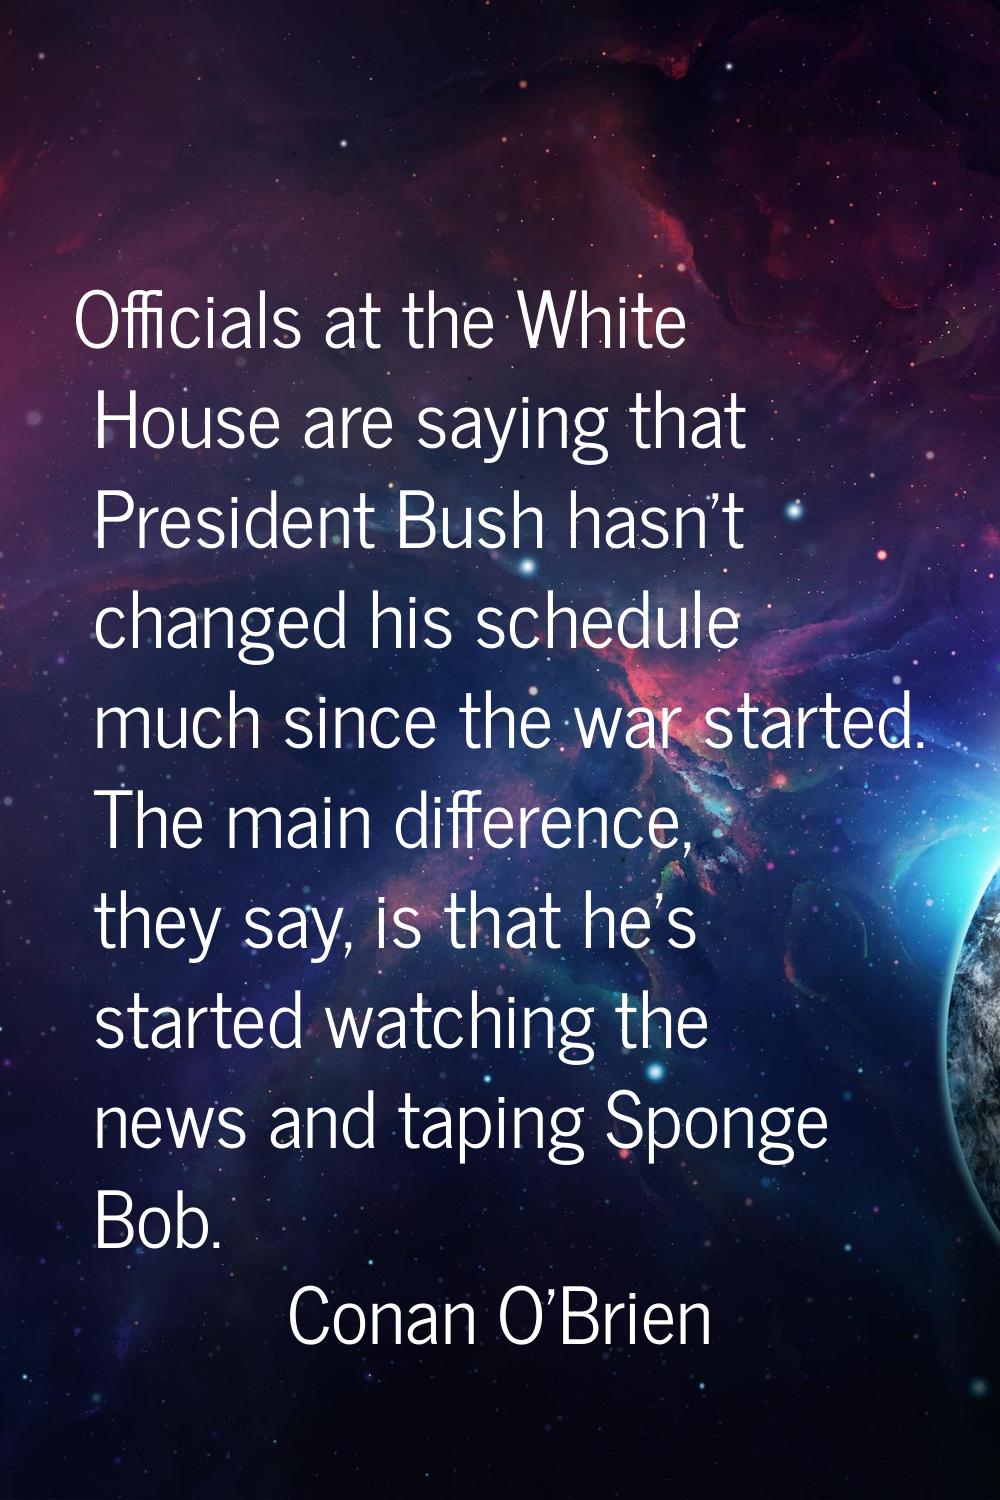 Officials at the White House are saying that President Bush hasn't changed his schedule much since 